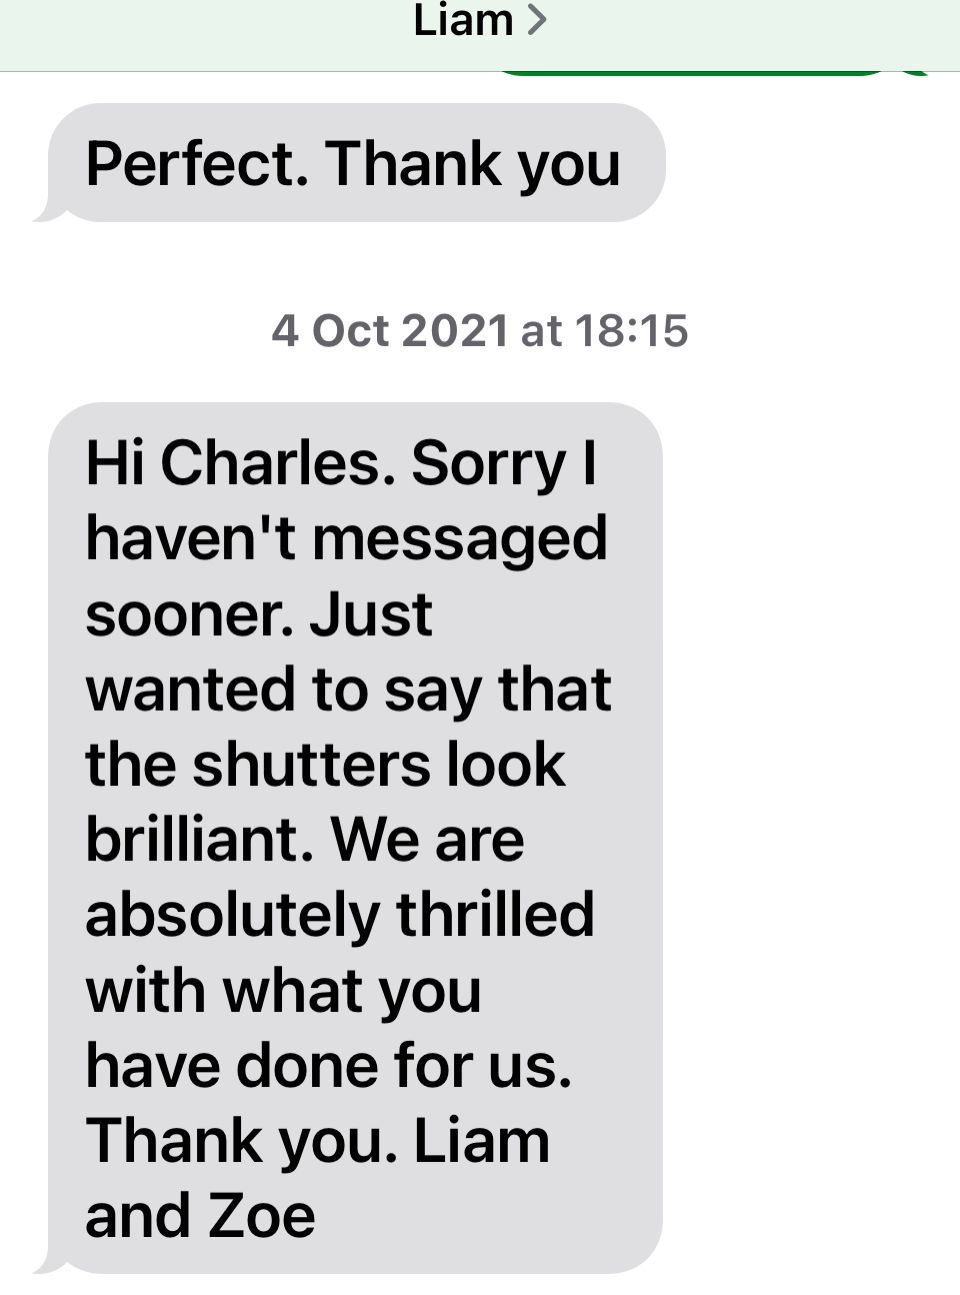 Customers Thrilled With Quality And Care Of Fitting Plantation Shutters